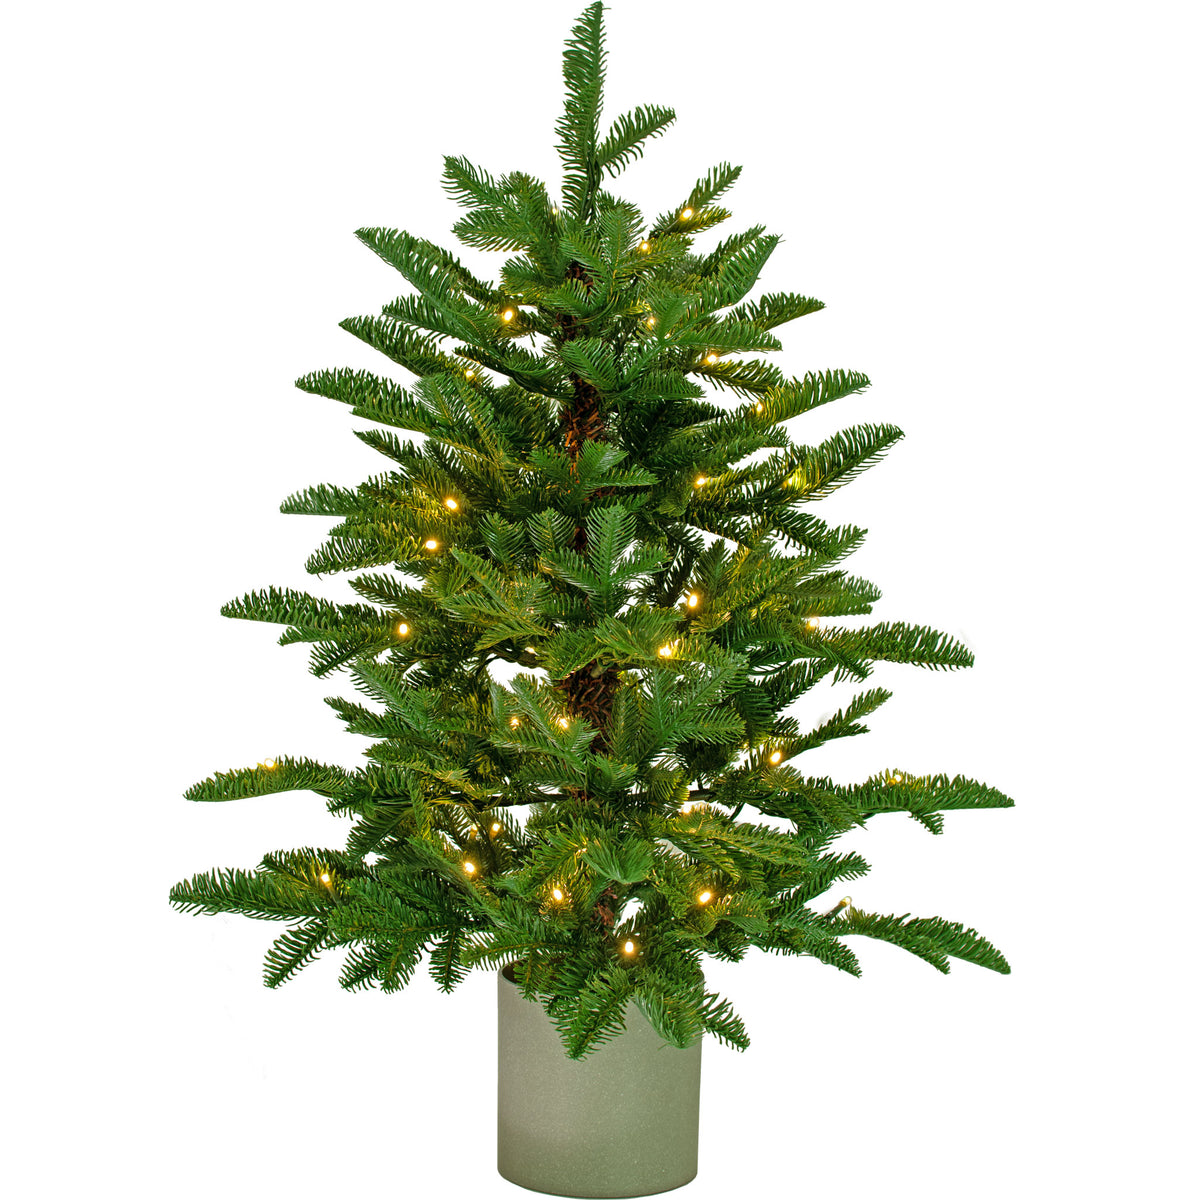 Introducing the 32in PreLit Tabletop Pine Tree from our Luxe Christmas Collection!